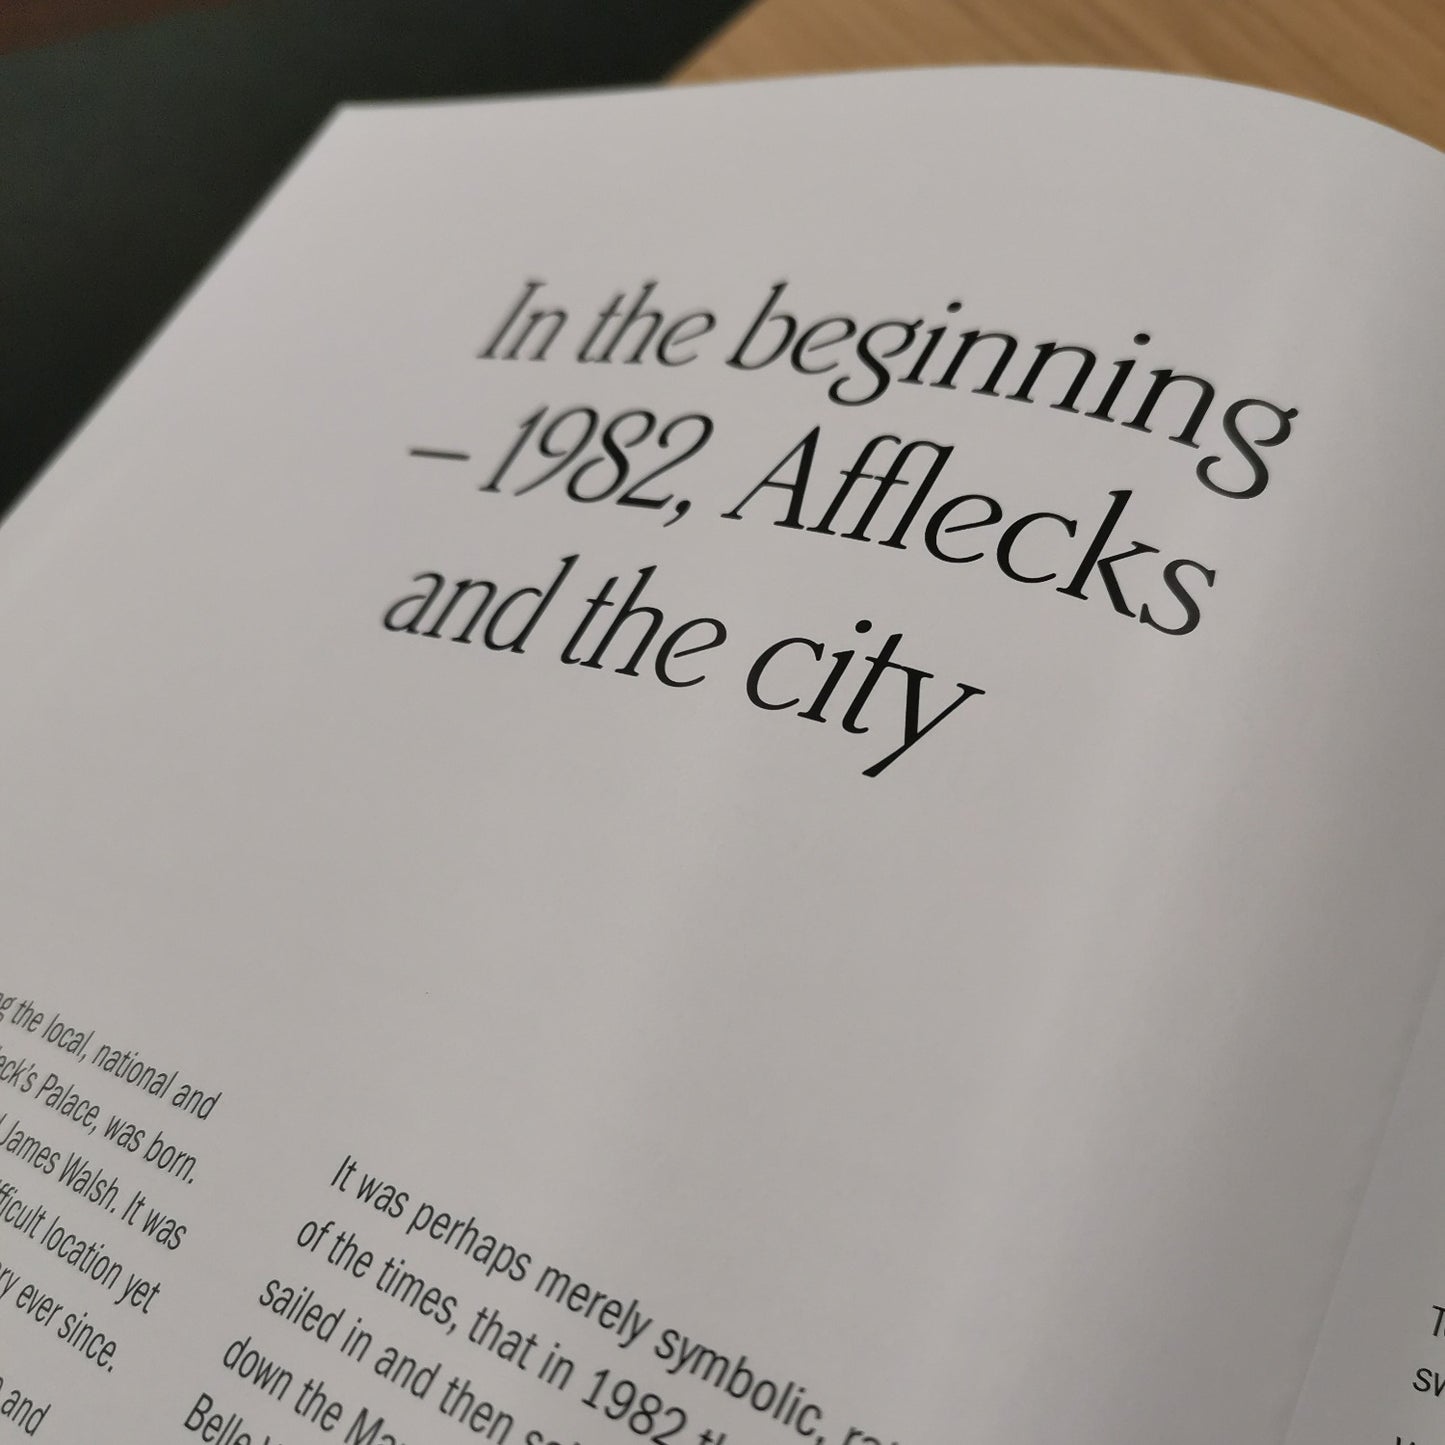 In the beginning - 1982, Afflecks and the city.